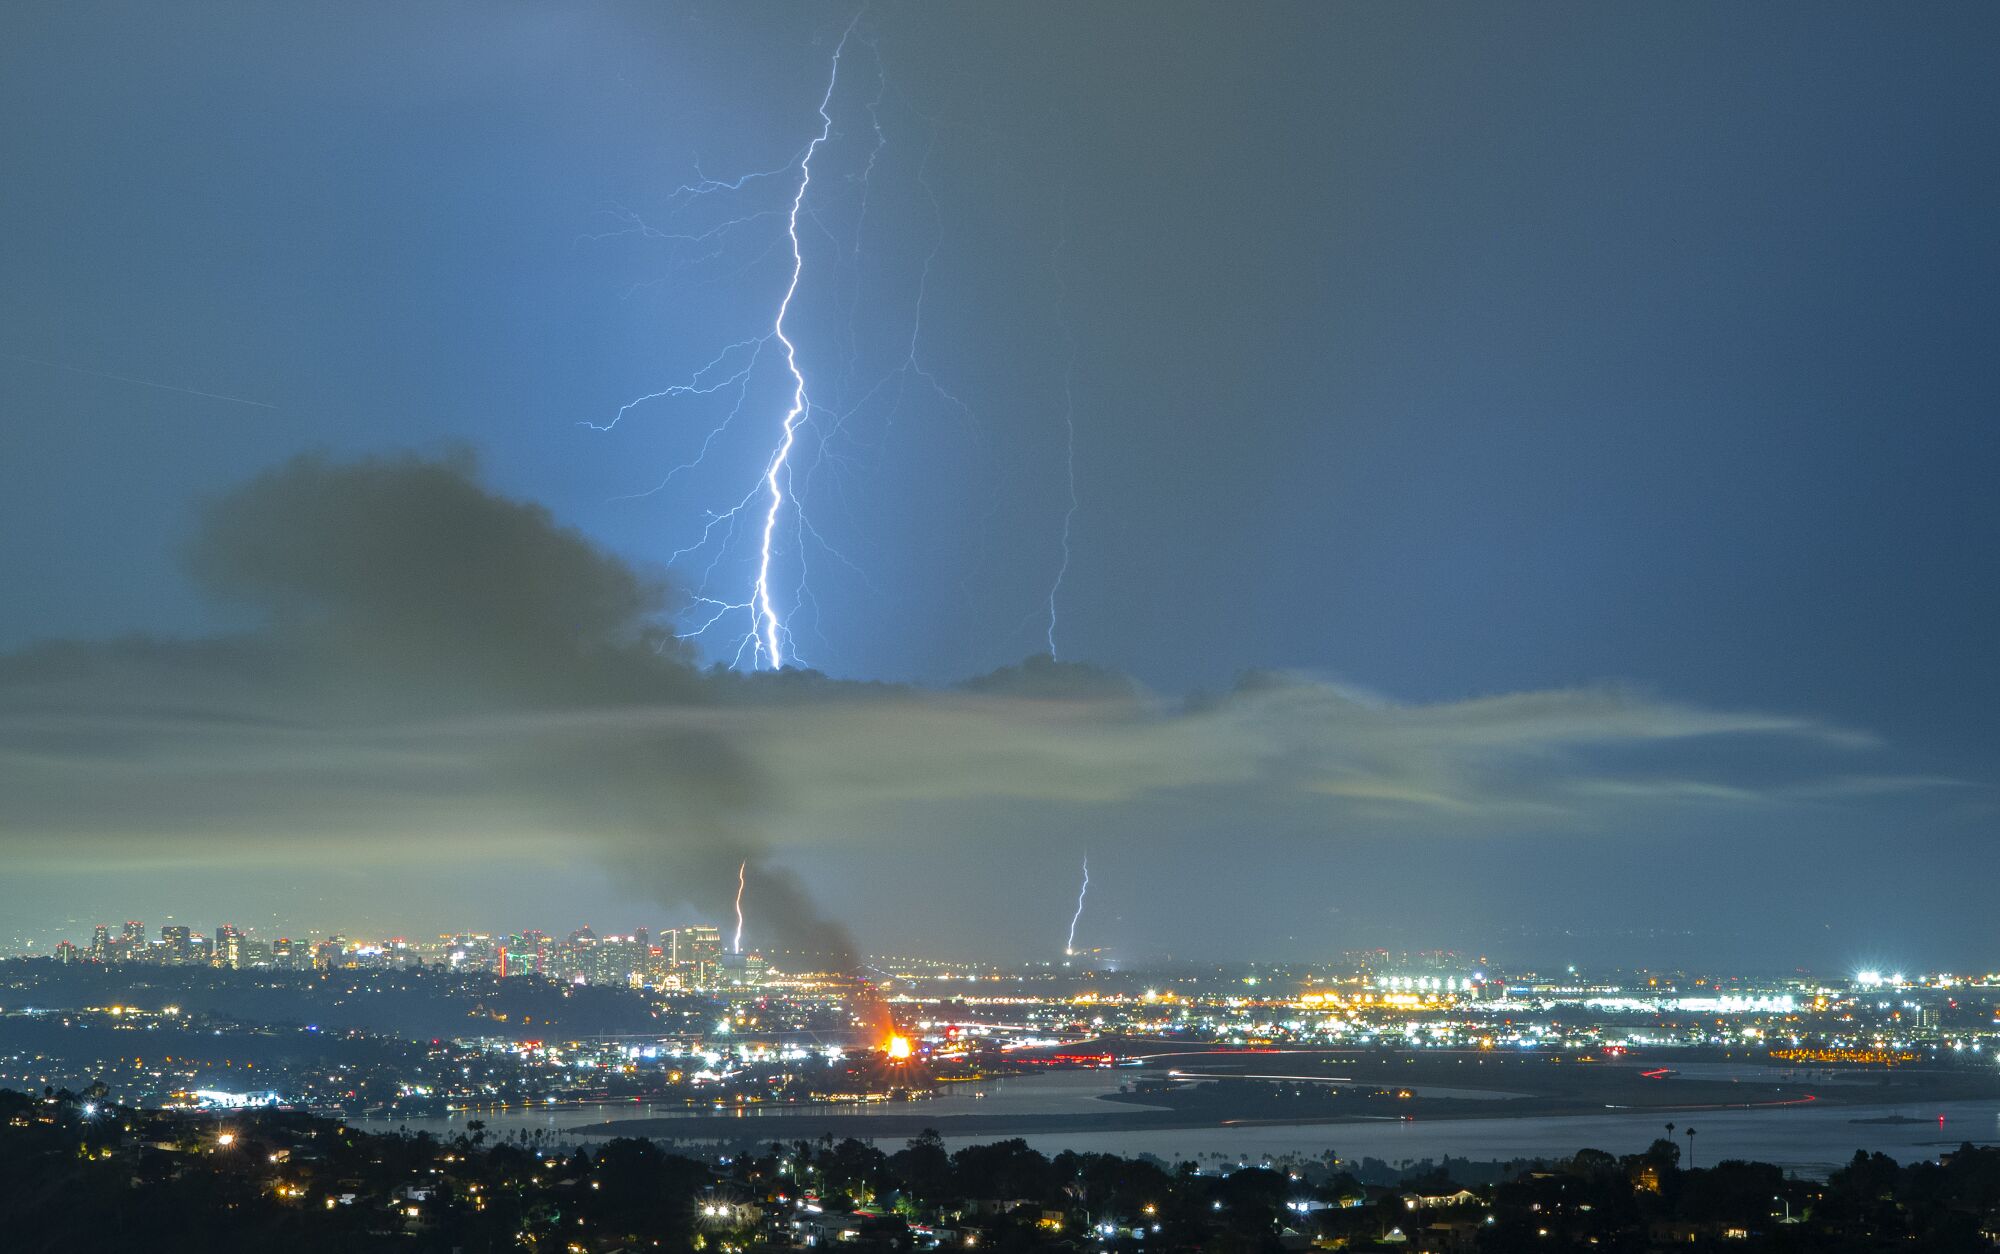 Lighting strikes the ground in San Diego as a palm trees burn from a lightning strike in the Morena area.